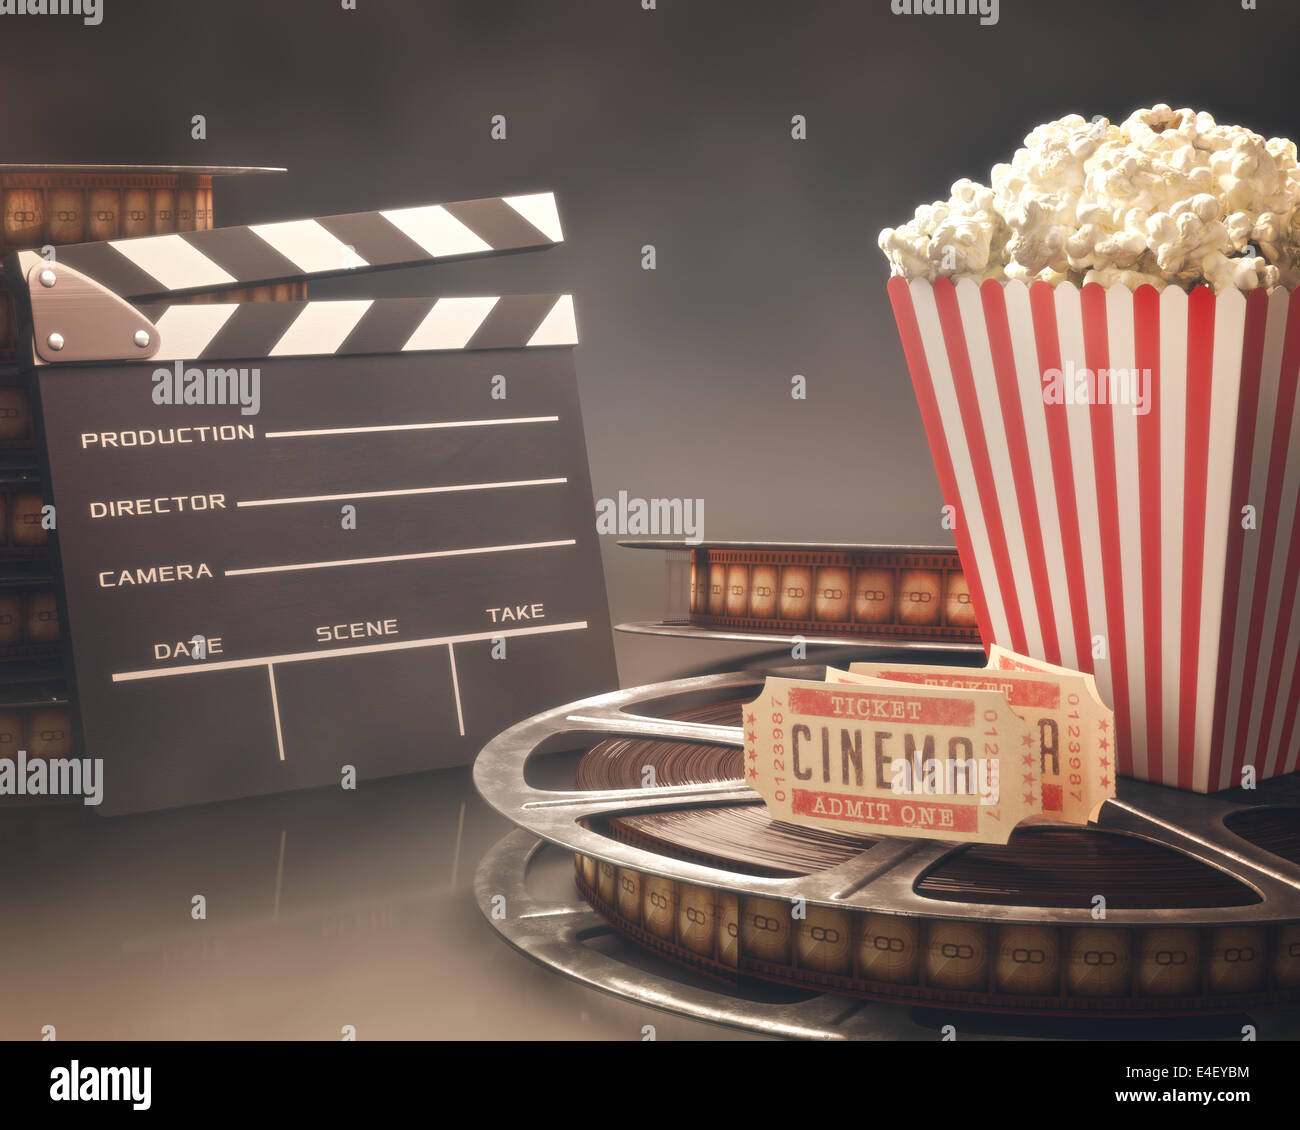 Objects related to the cinema on reflective surface. Stock Photo